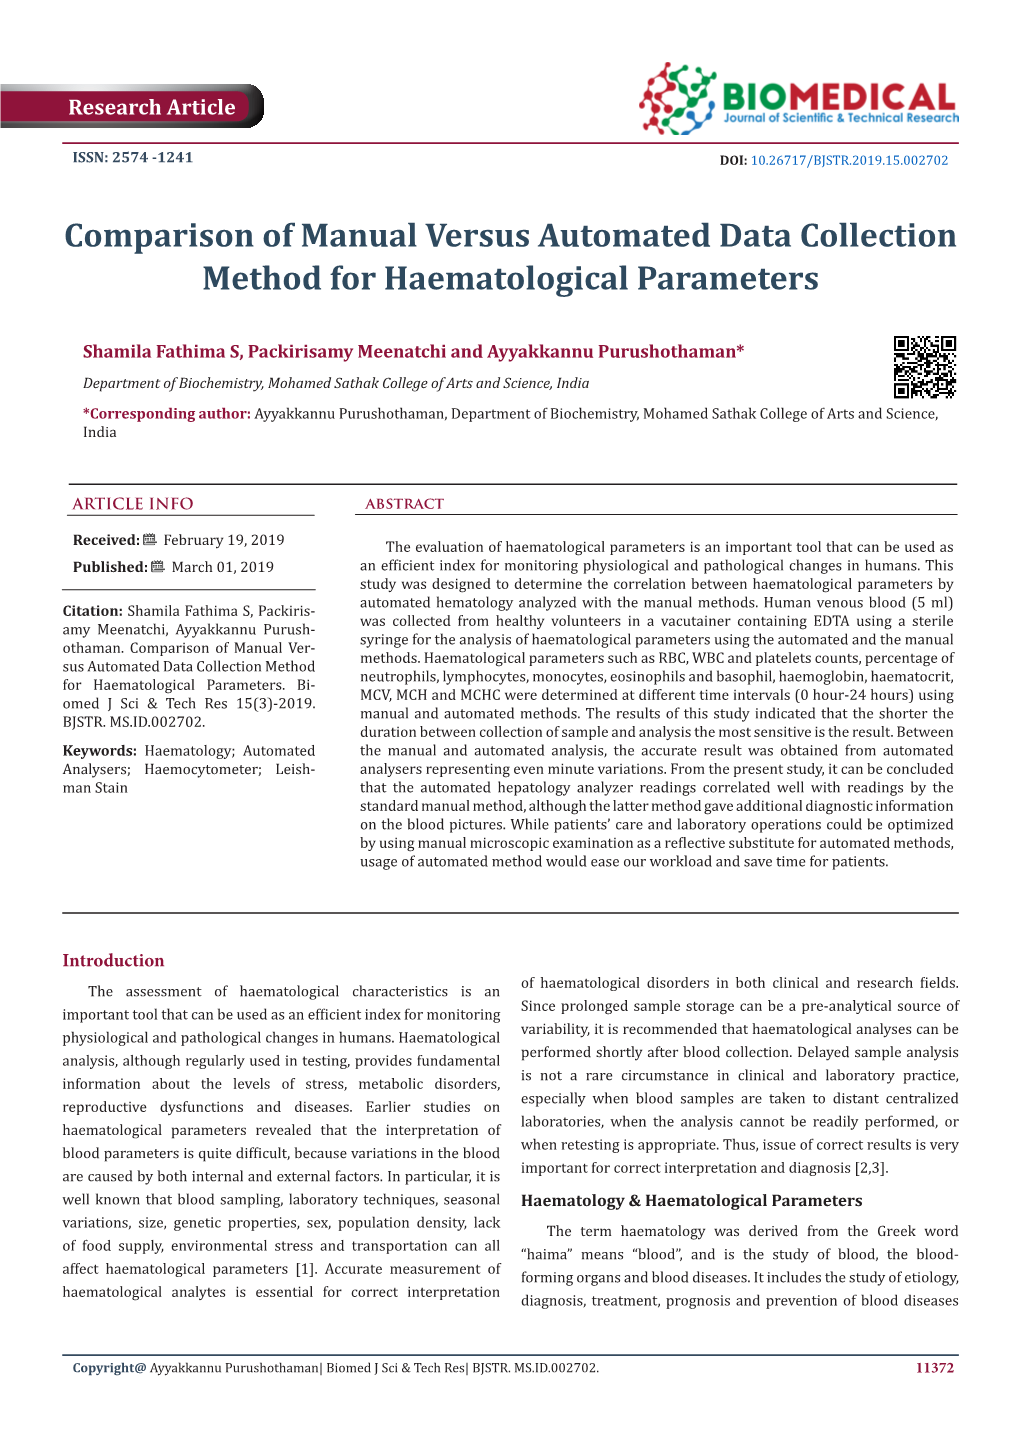 Comparison of Manual Versus Automated Data Collection Method for Haematological Parameters